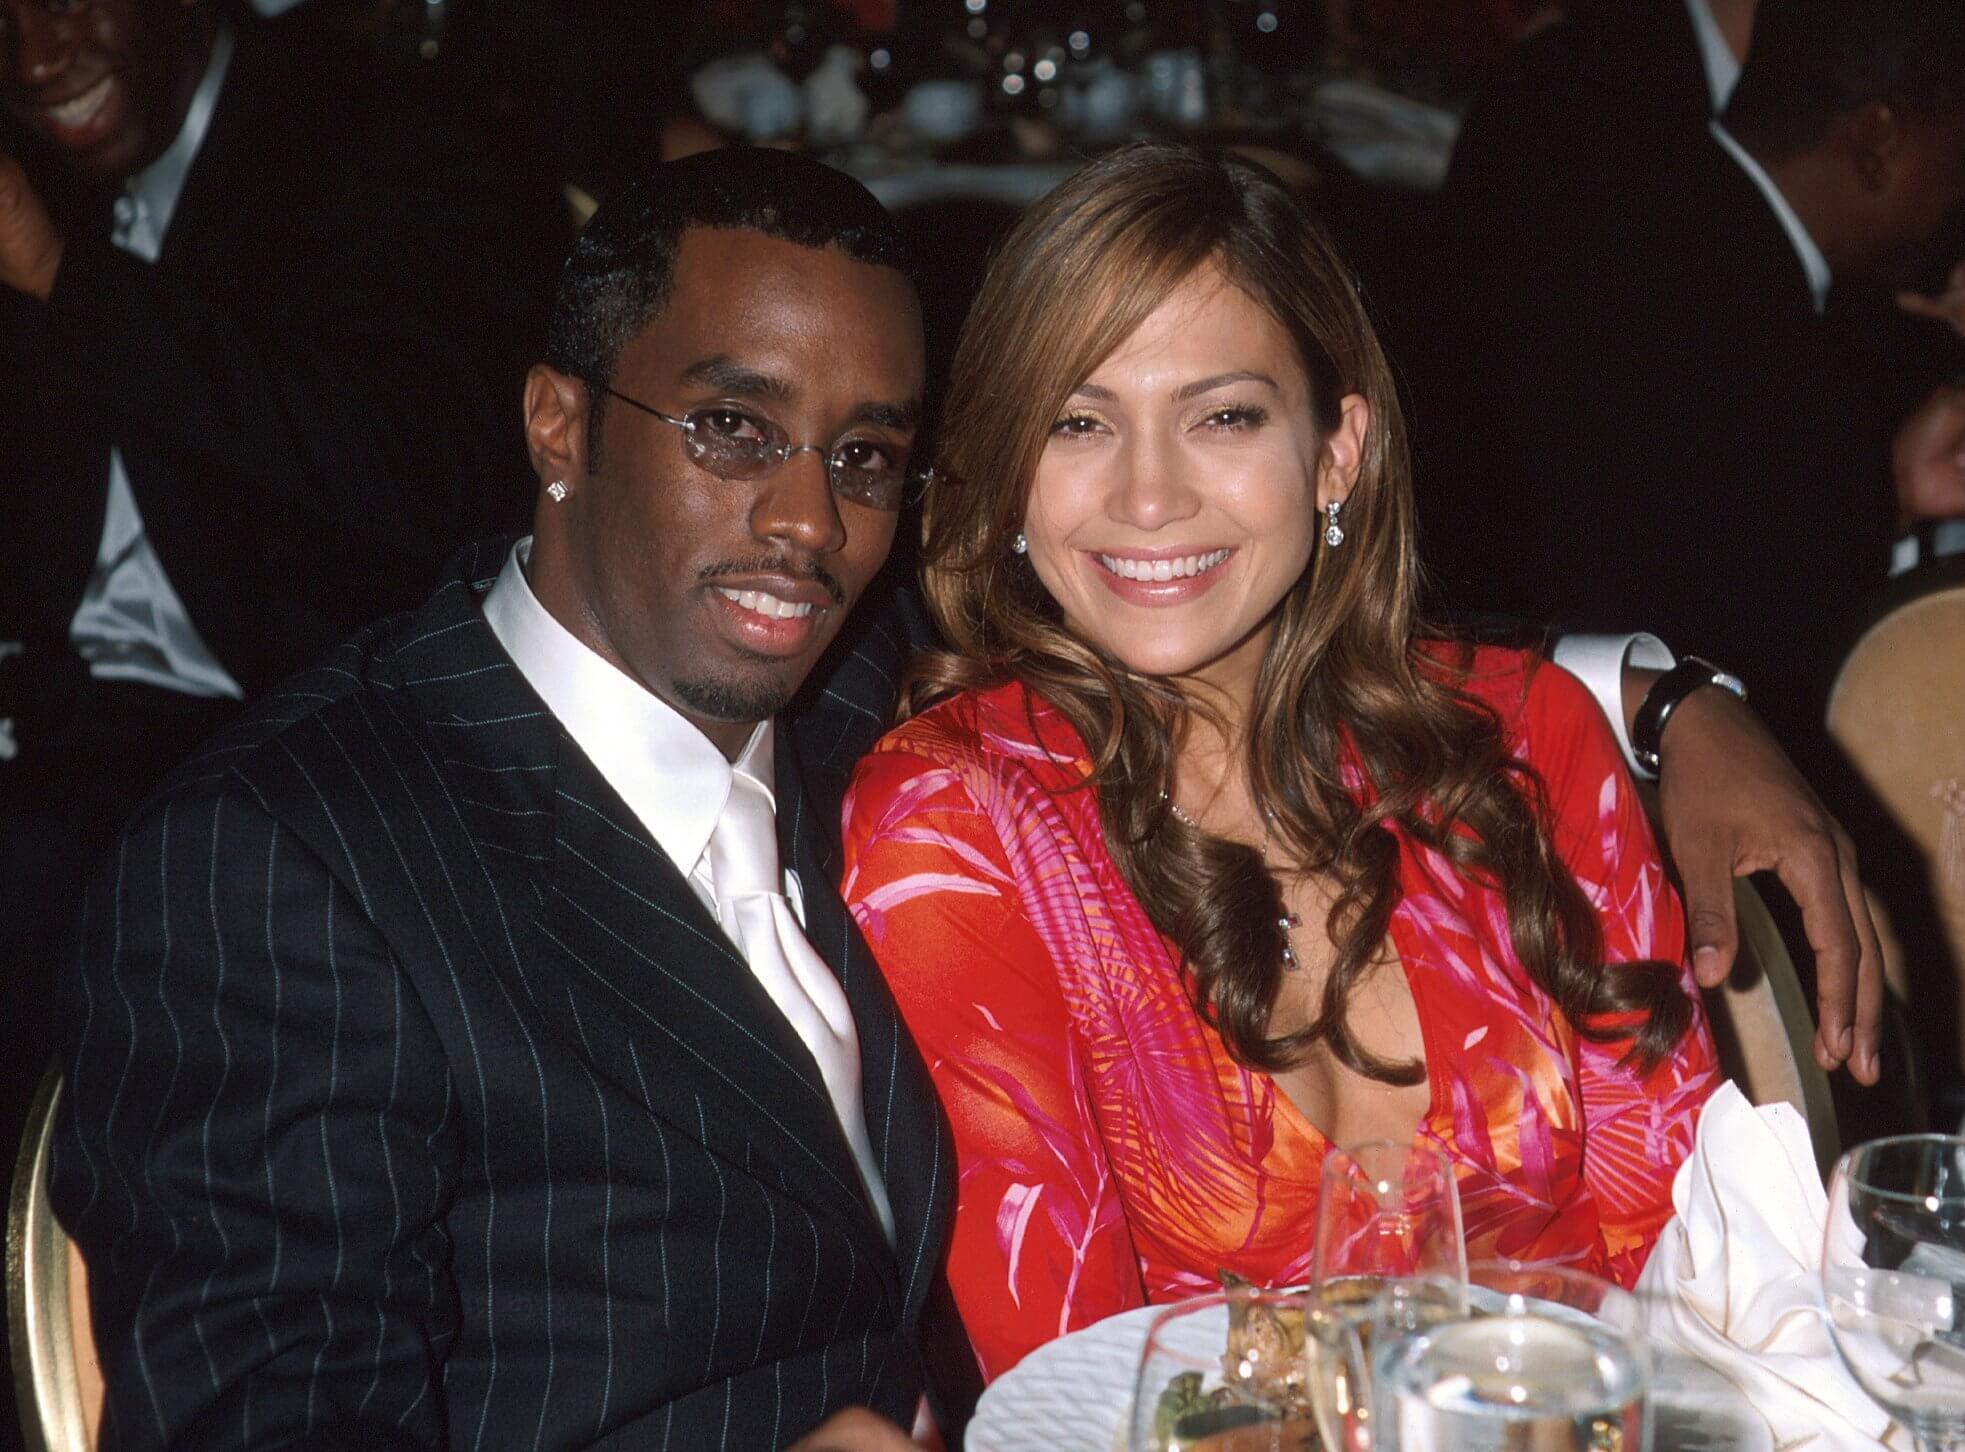 Jennifer Lopez Allegedly ‘Shudders’ When Thinking About P. Diddy and ‘Doesn’t Want to Be Associated’